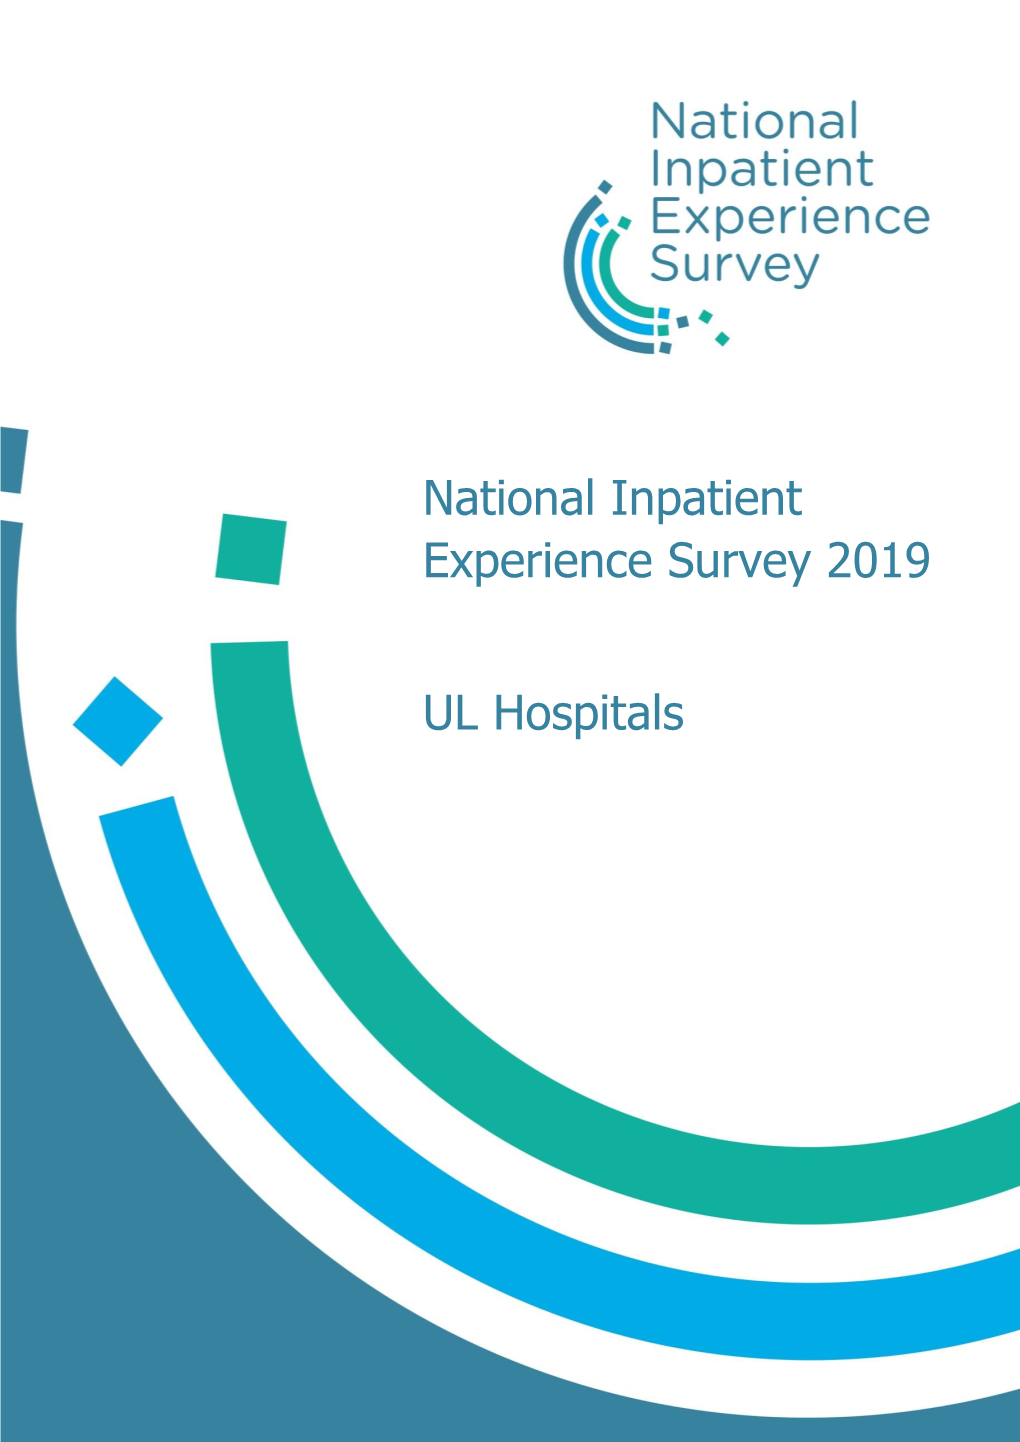 National Inpatient Experience Survey 2019 UL Hospitals